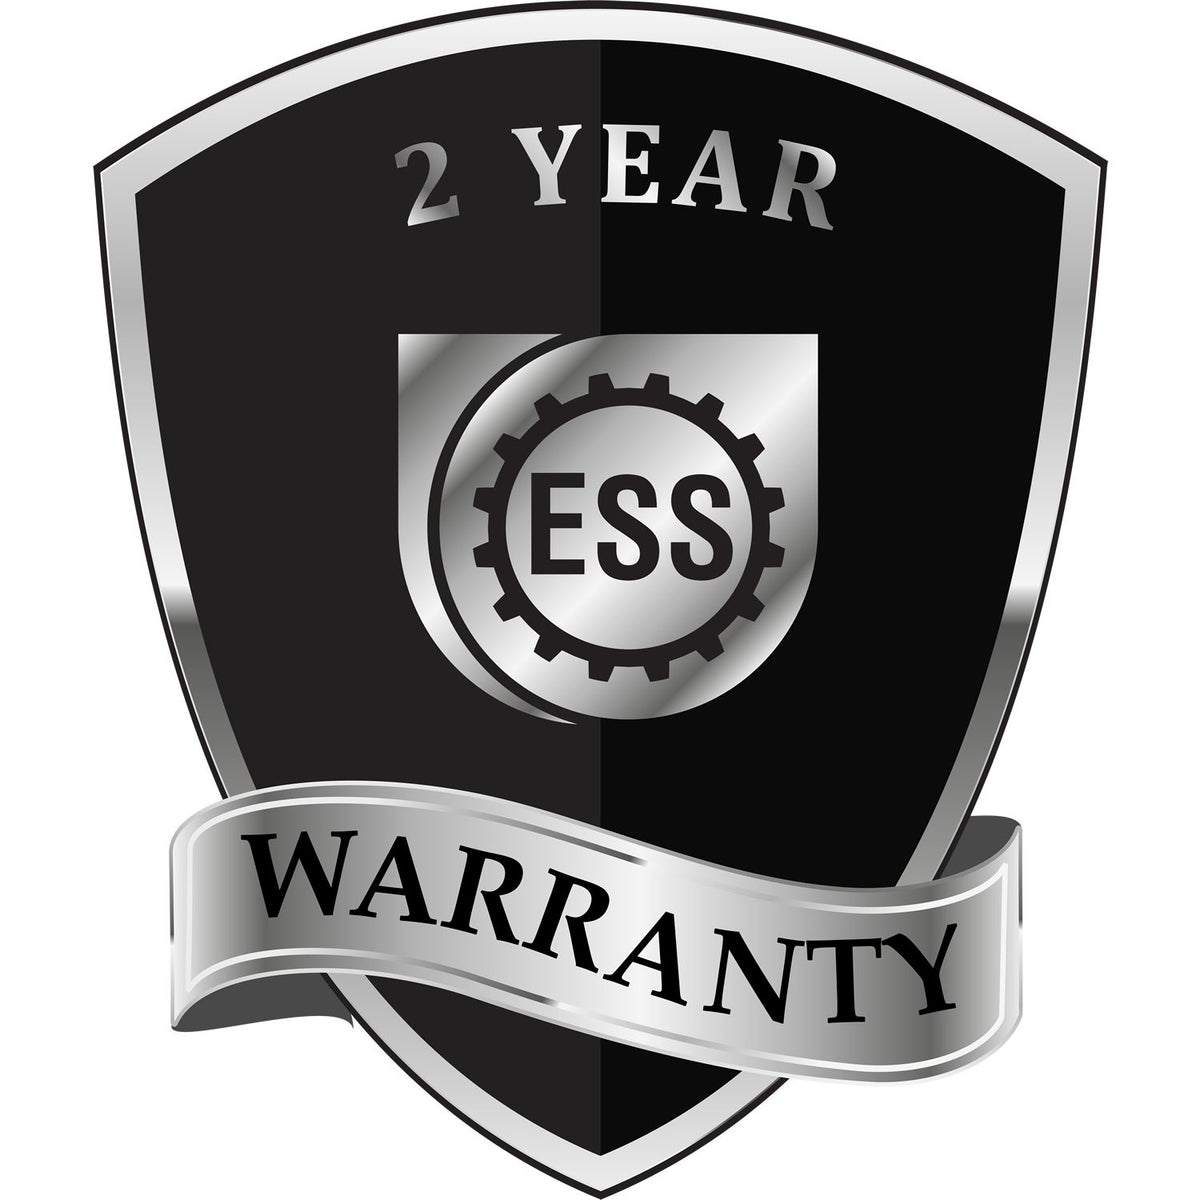 A badge or emblem showing a warranty icon for the Extended Long Reach Louisiana Surveyor Embosser